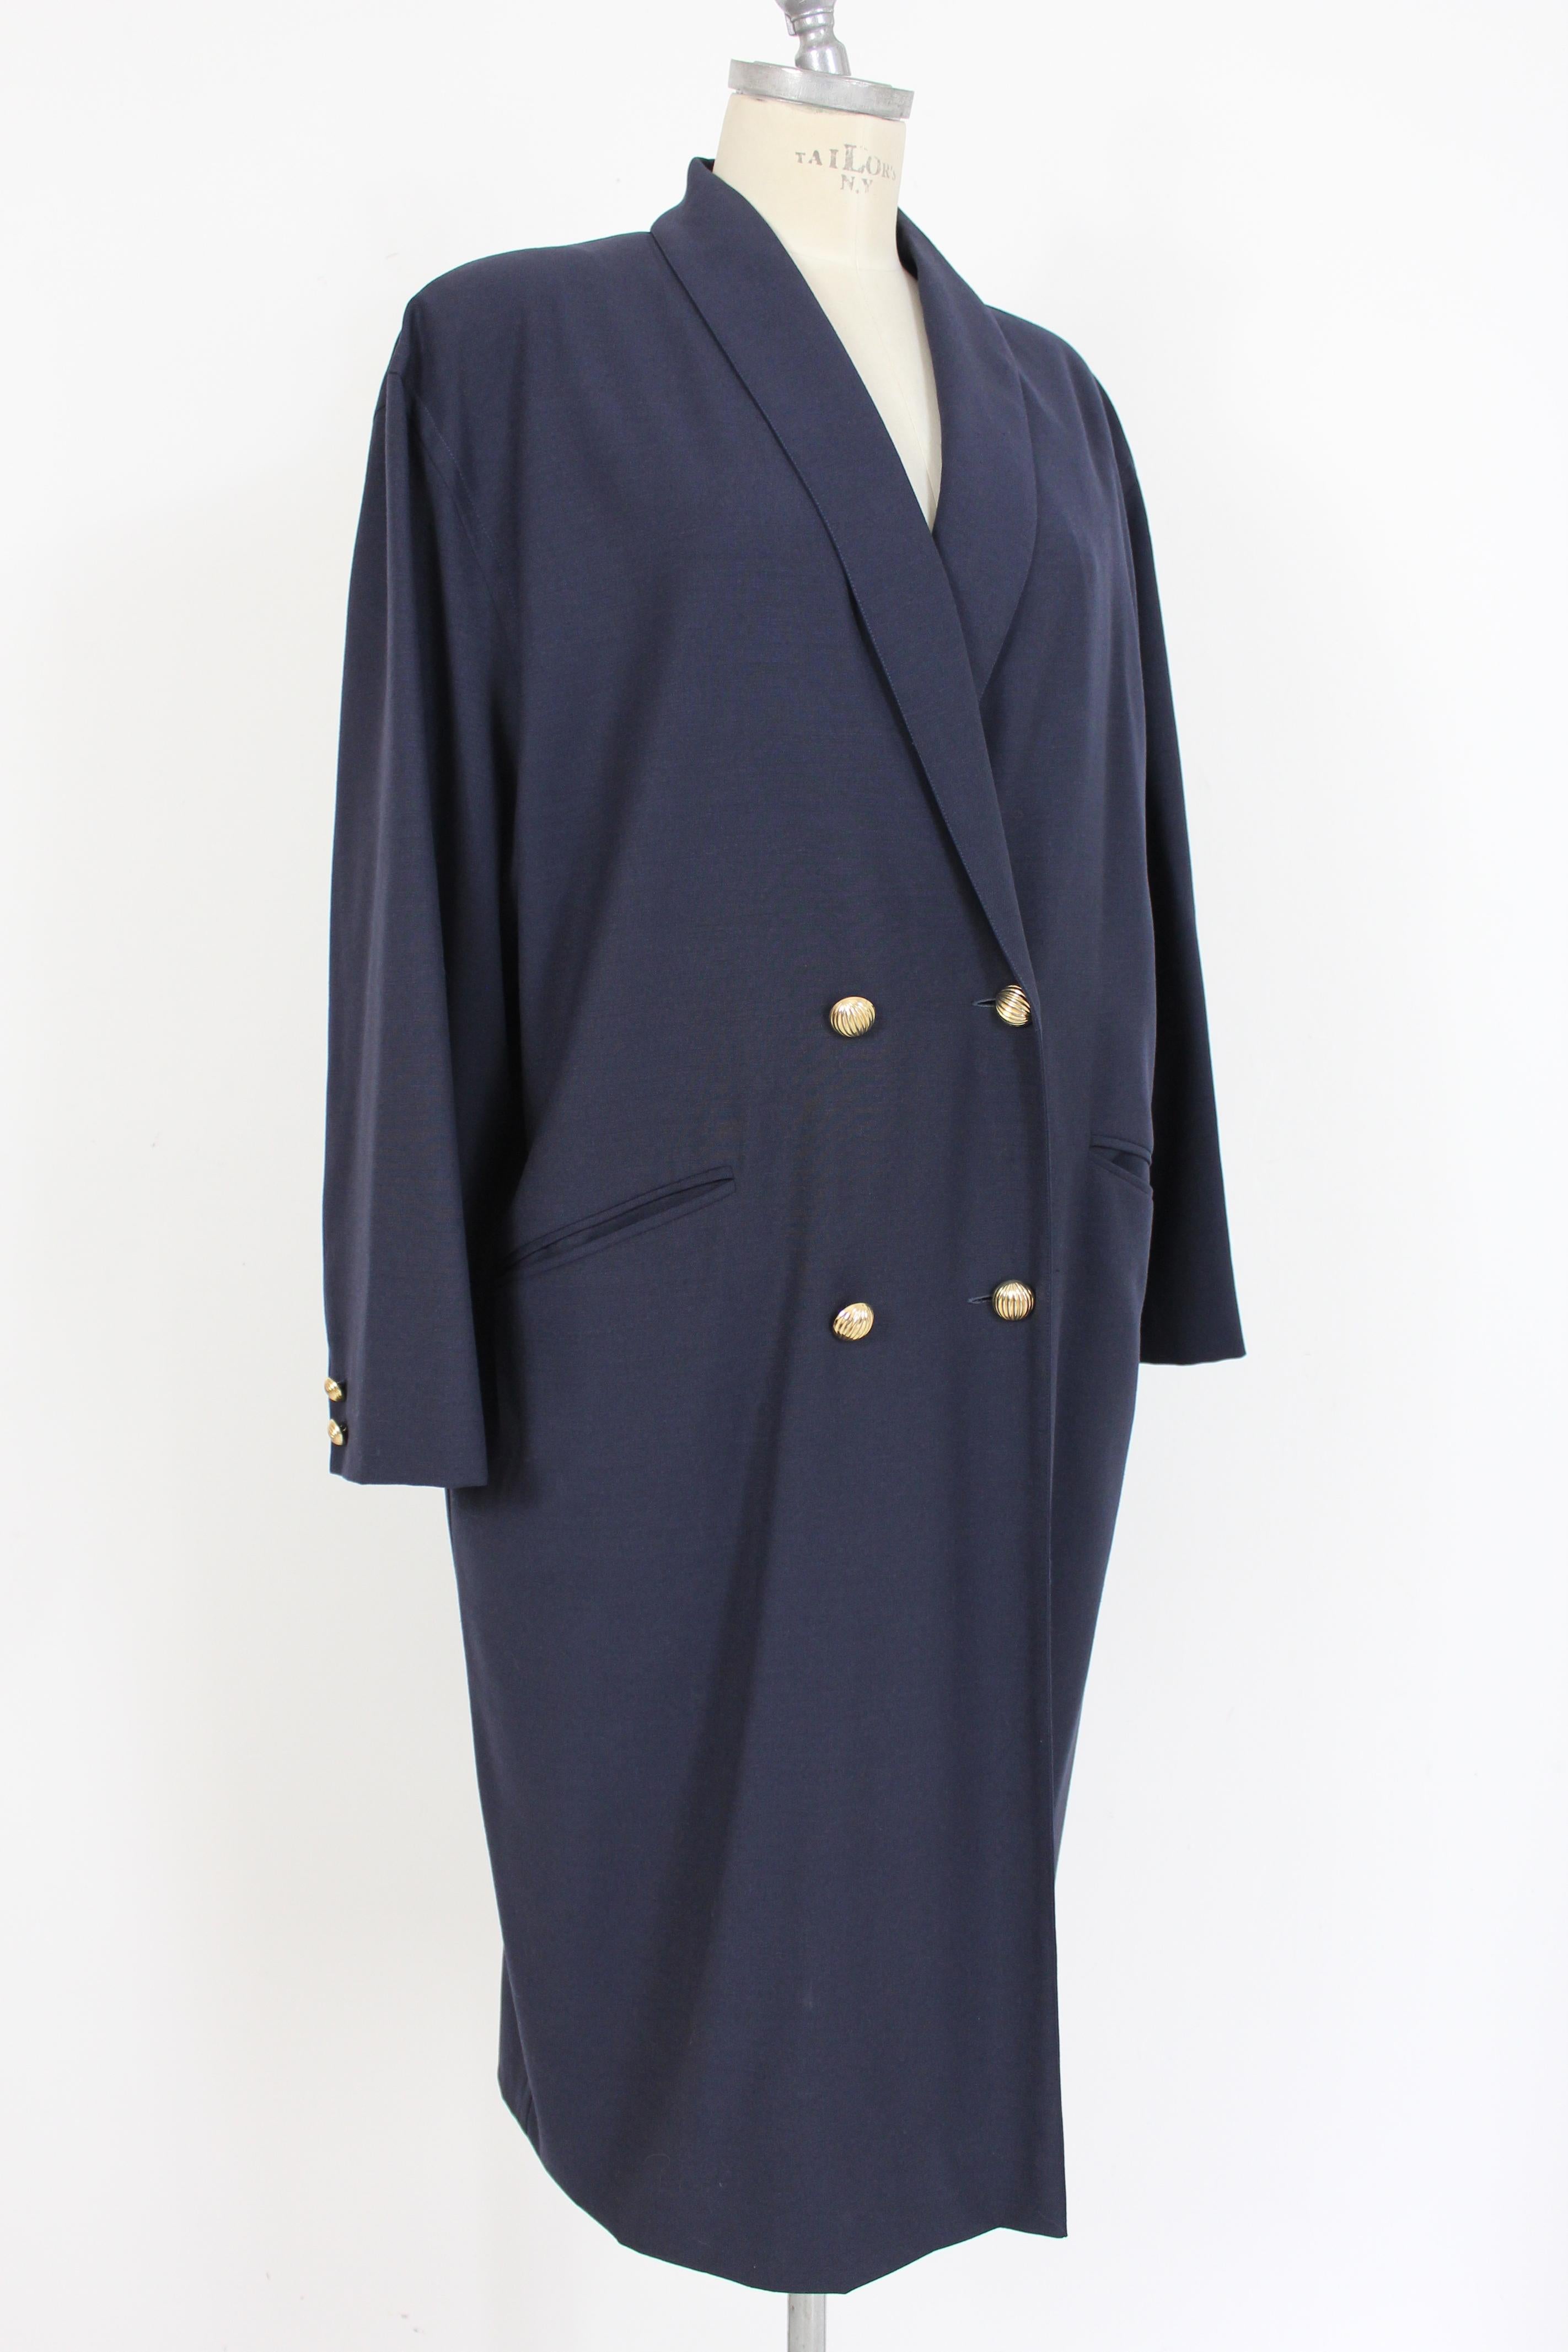 Krizia Blue Wool Classic Long Double Breasted Coat In Excellent Condition In Brindisi, Bt